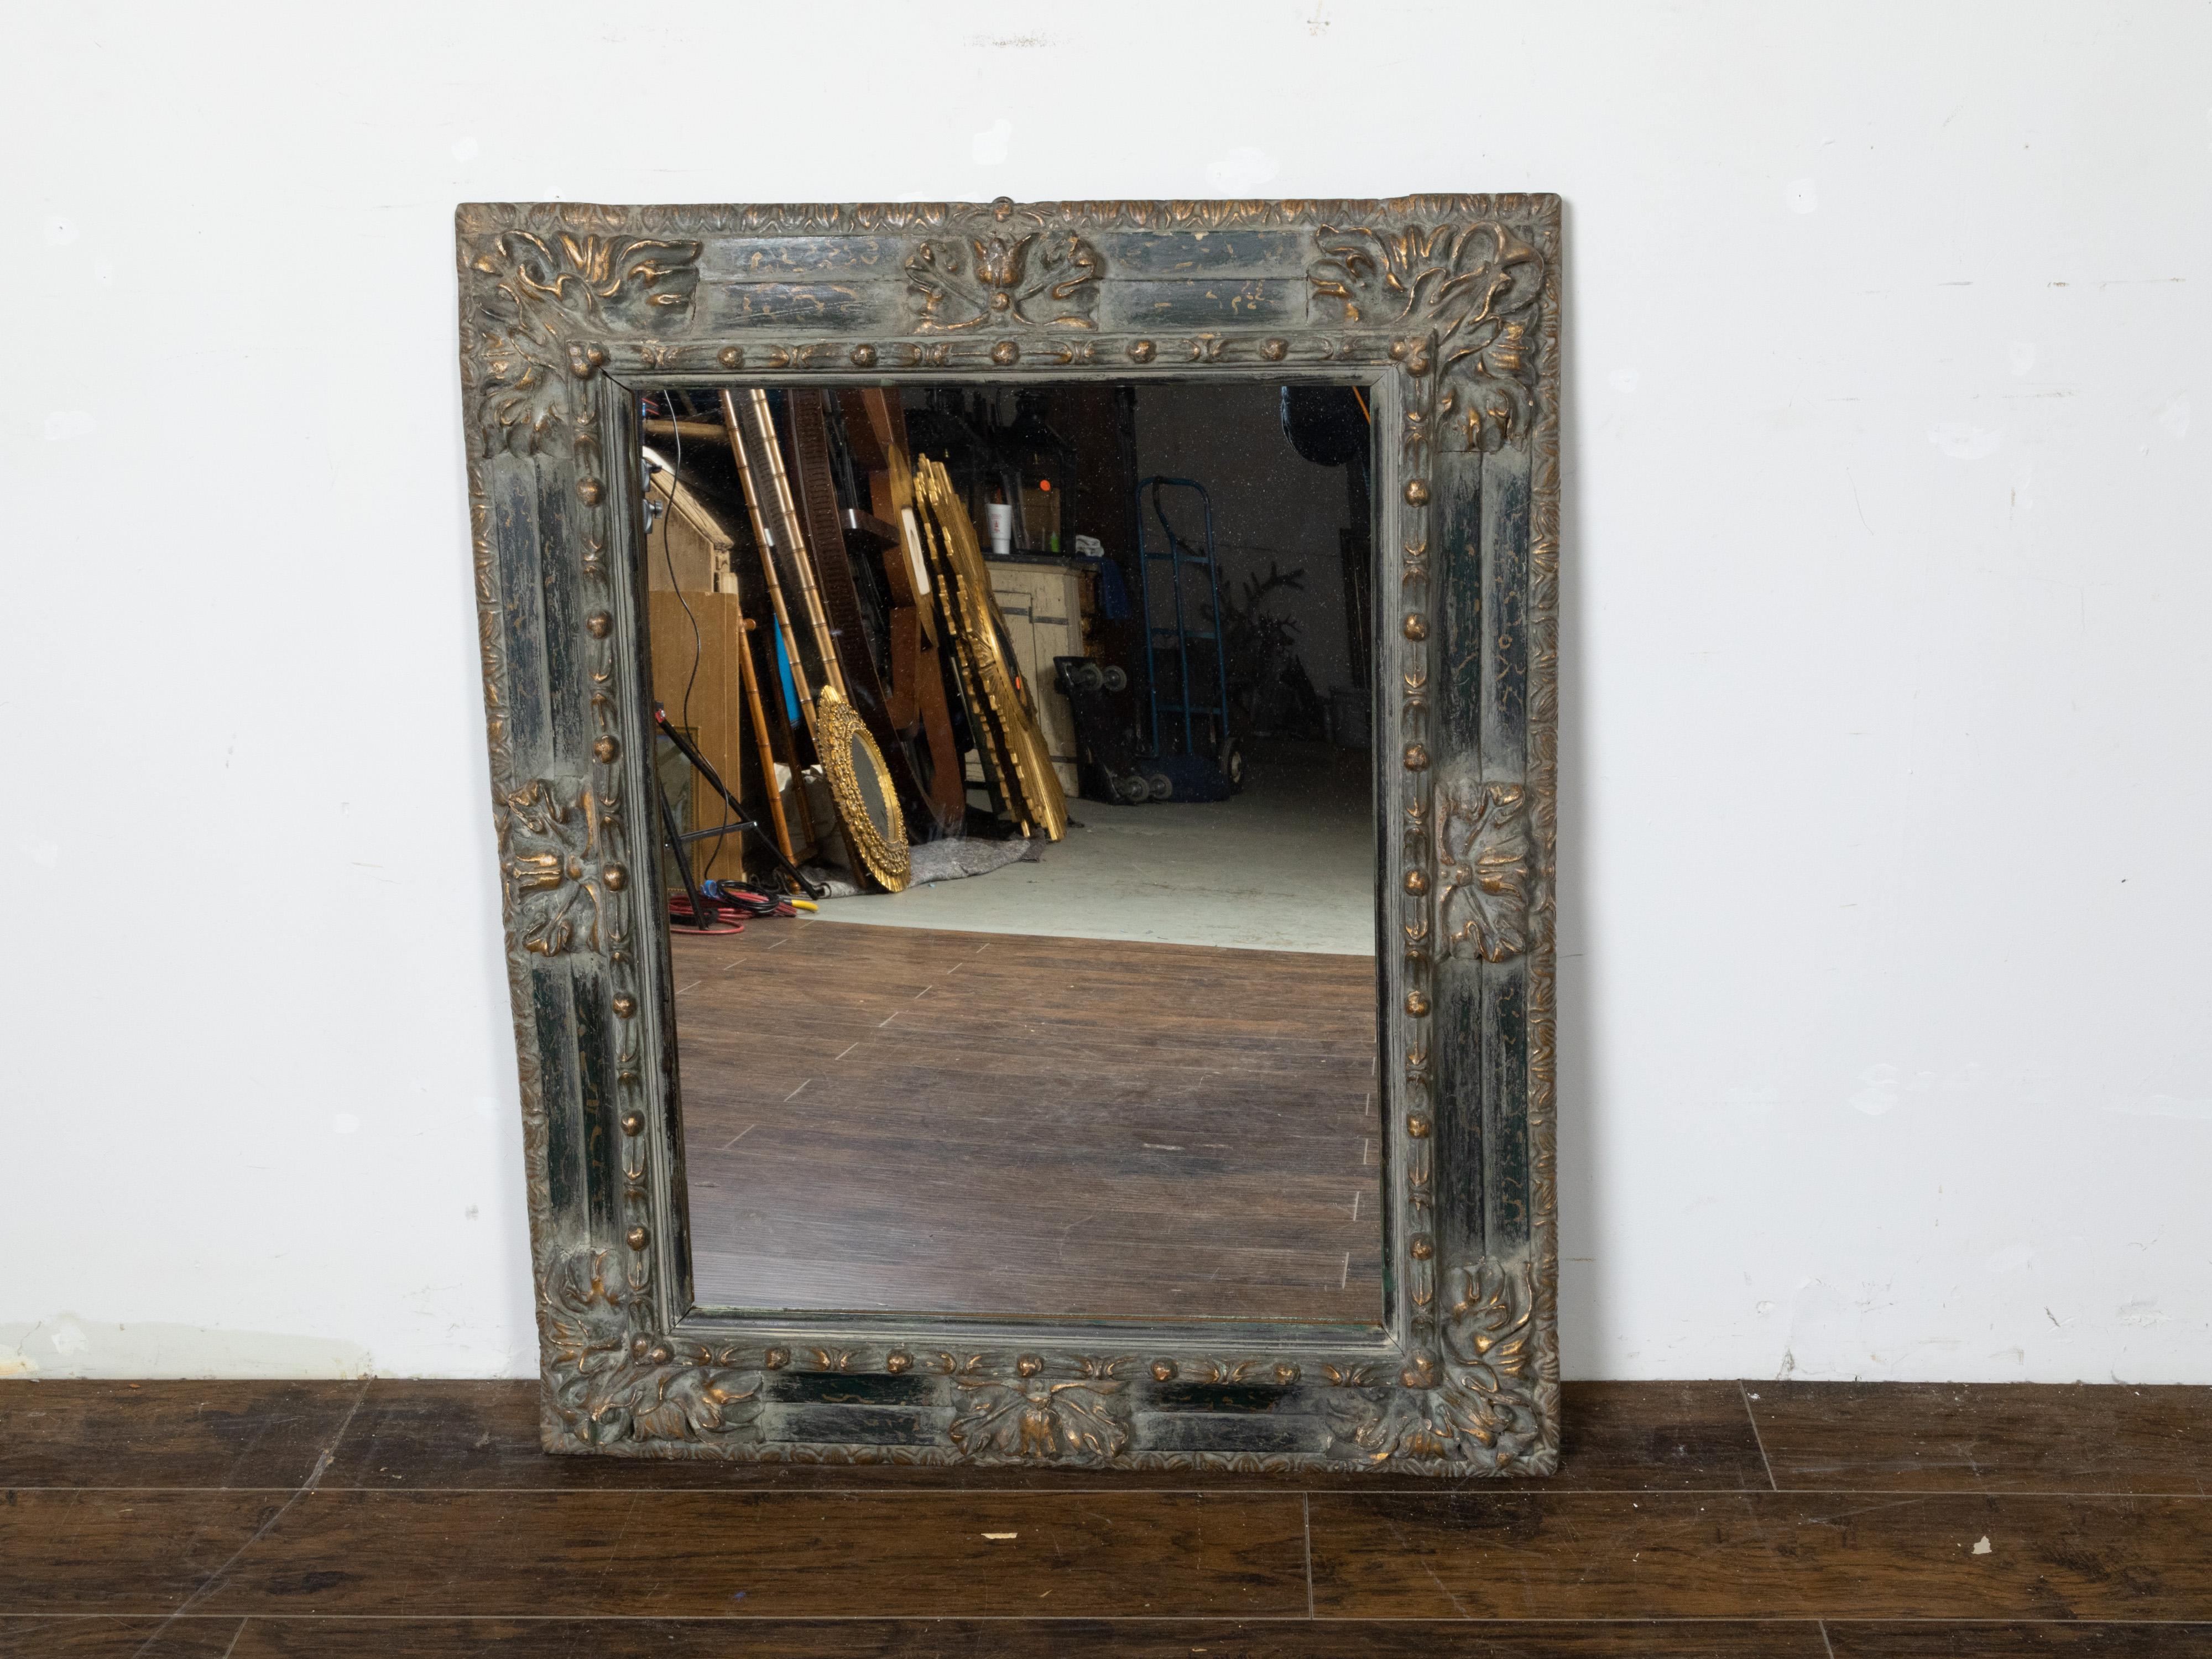 An Italian hand-carved and parcel gilt wooden mirror from the 18th century, with rais de cœur and campanula style motifs. Hand-crafted in Italy during the 18th century, this rectangular wooden mirror features a central clear mirror plate surrounded